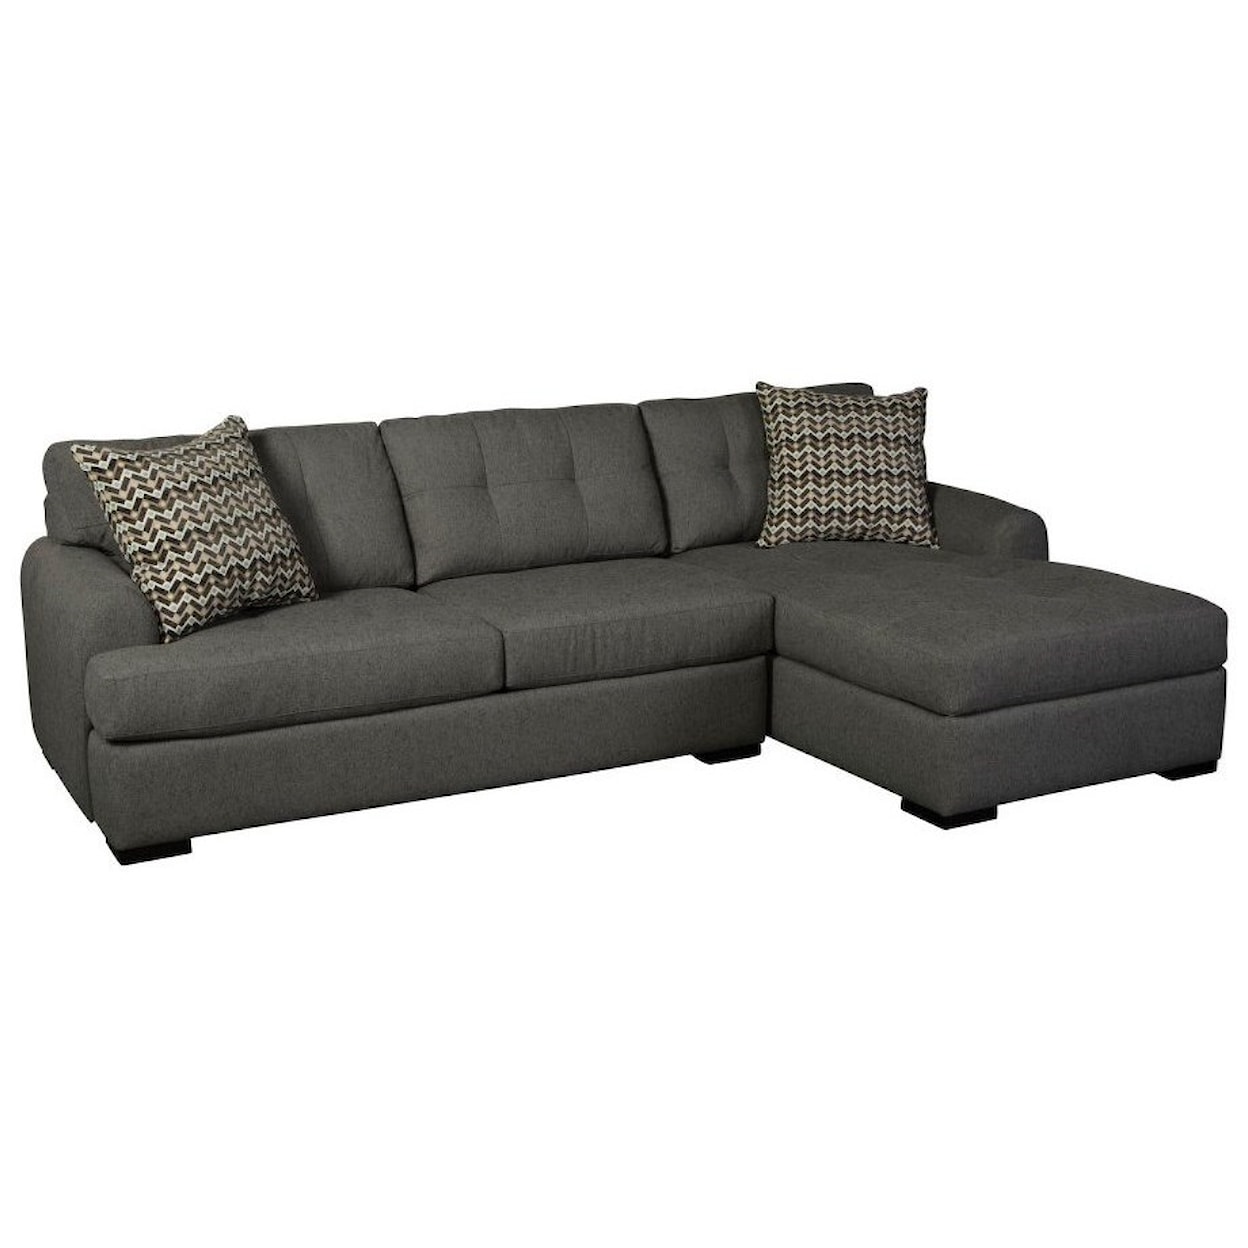 Jonathan Louis Crosby 3-Seat Chaise Sectional with RAF Chaise